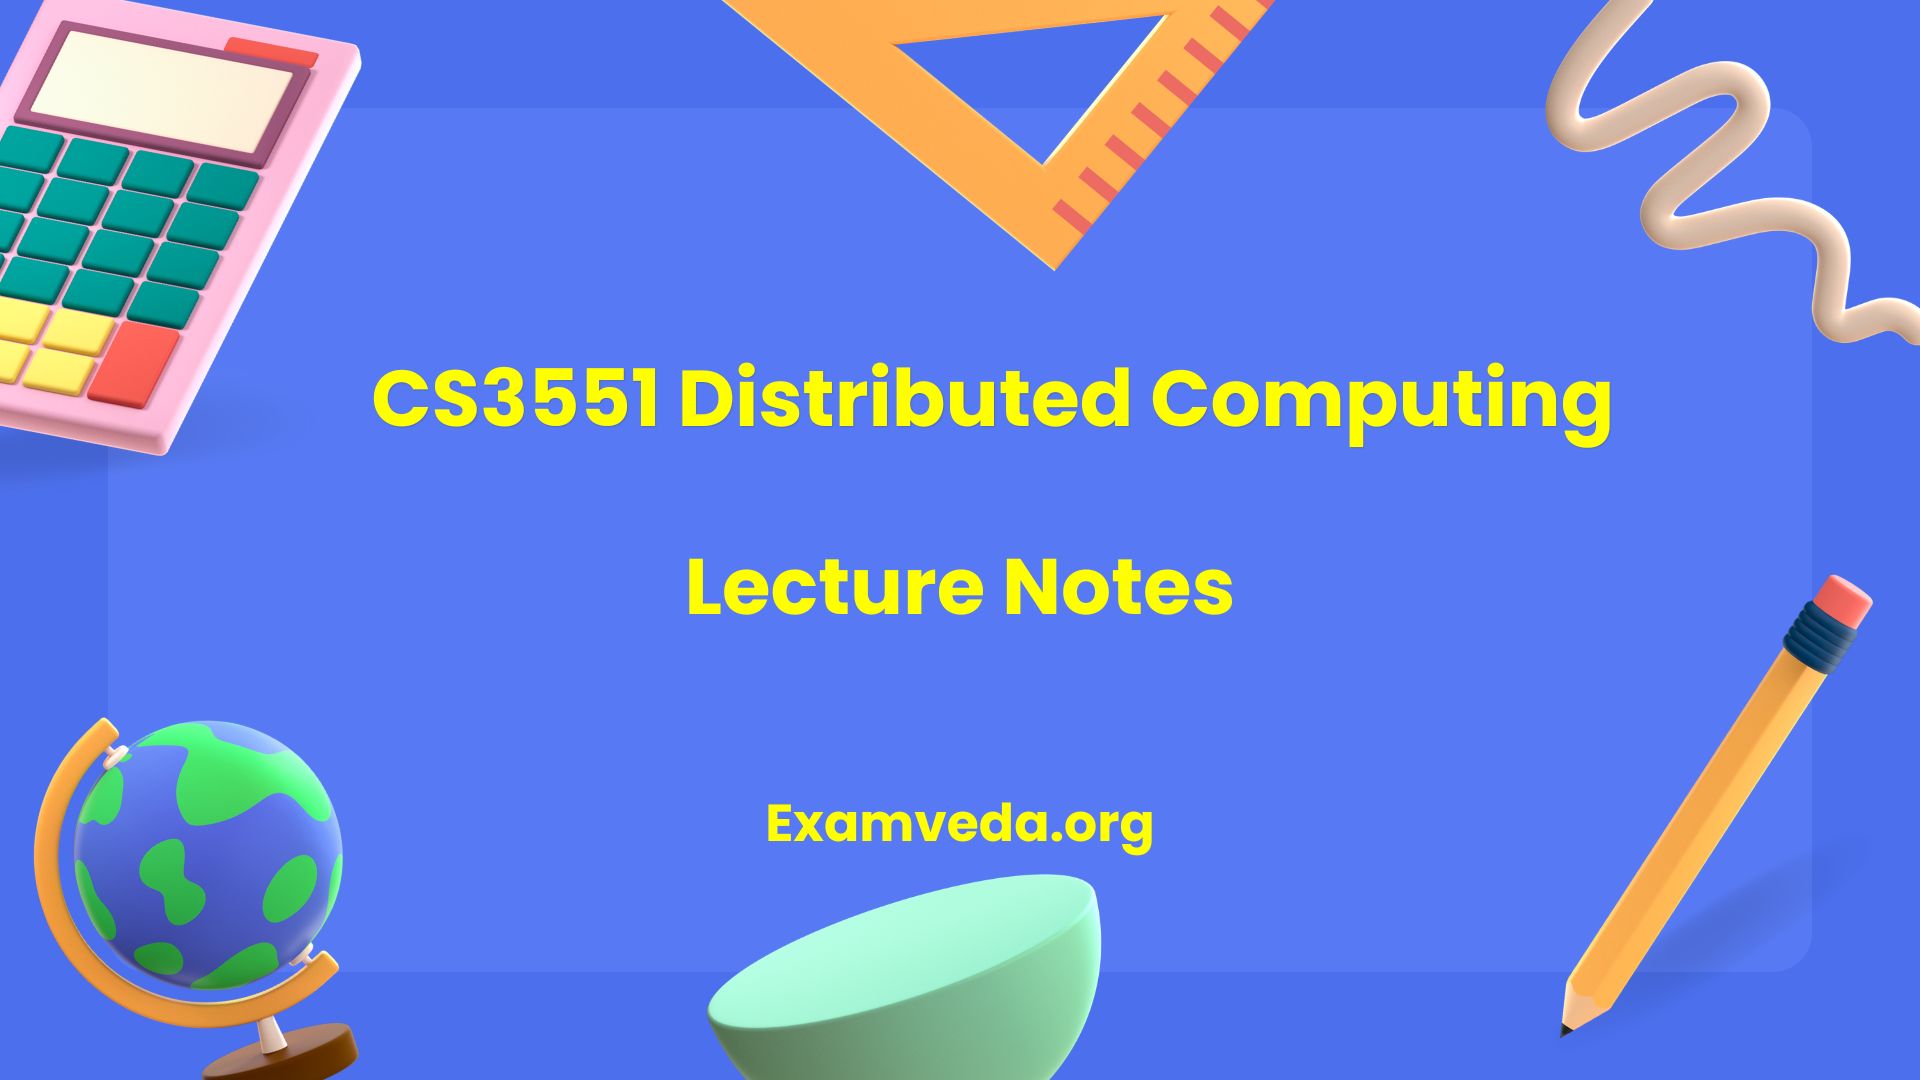 CS3551 Distributed Computing Lecture Notes